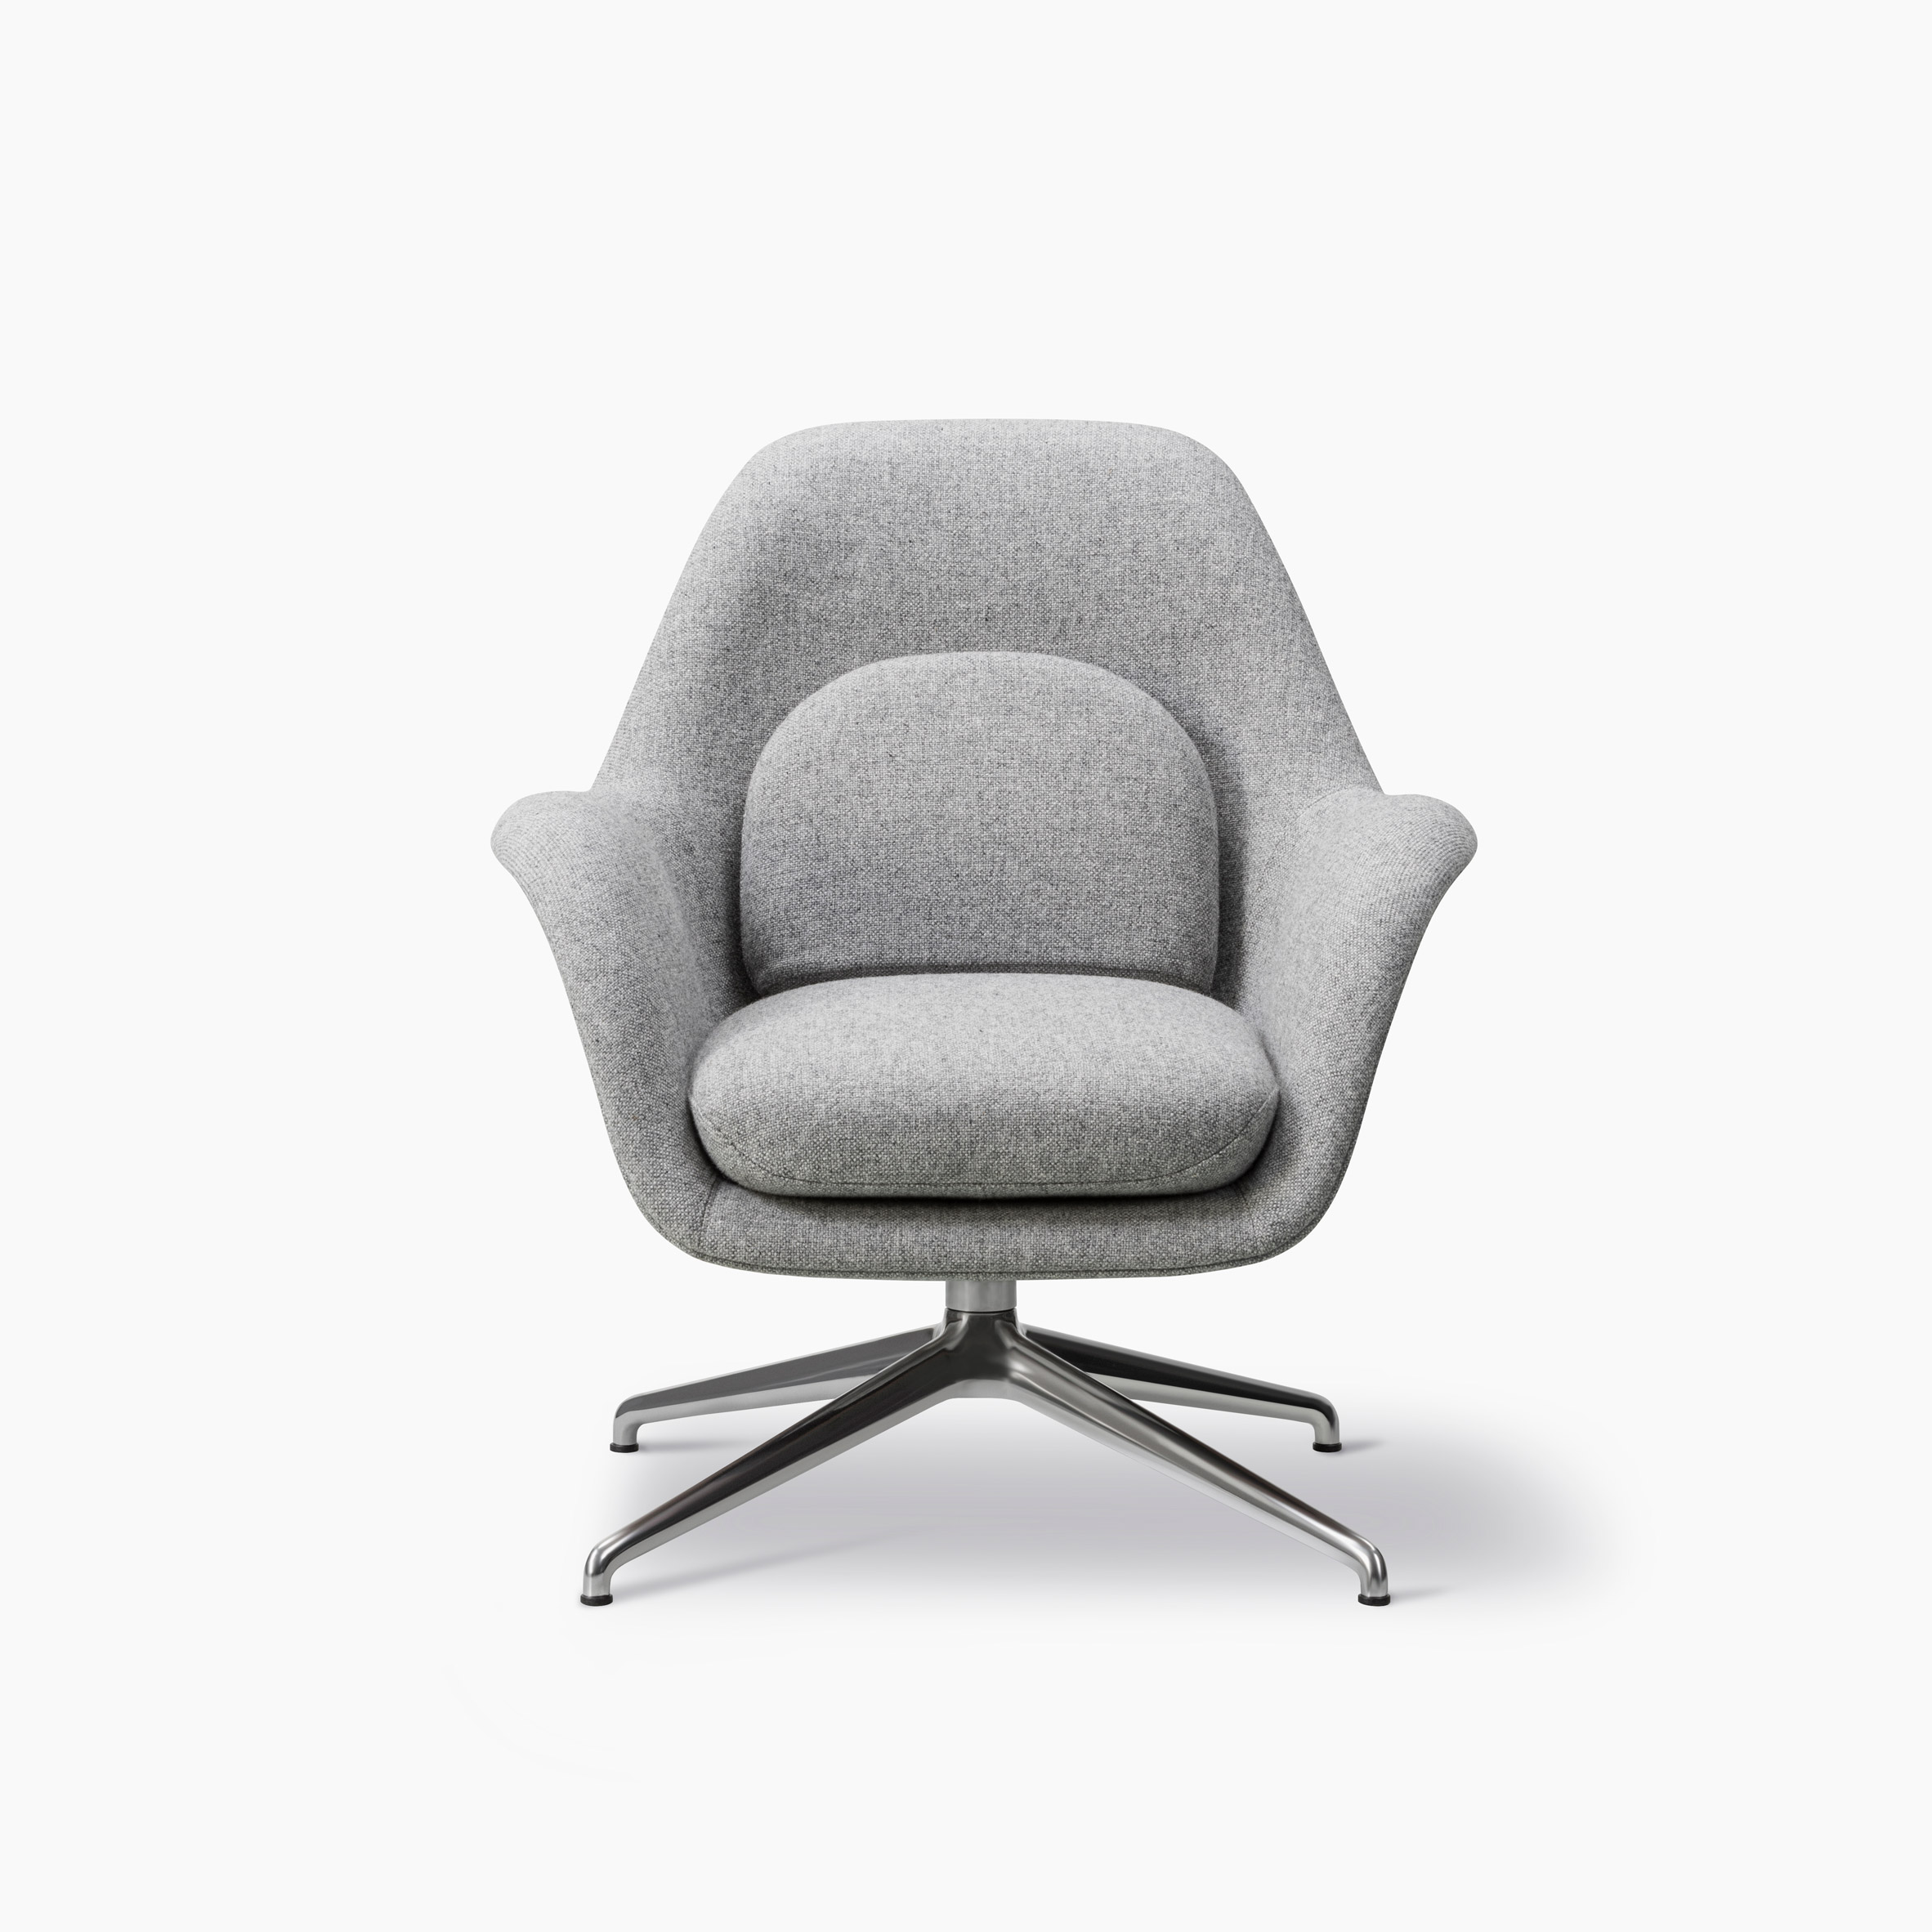 A Swoon lounge chair with a swivel base by Space Copenhagen for Fredericia